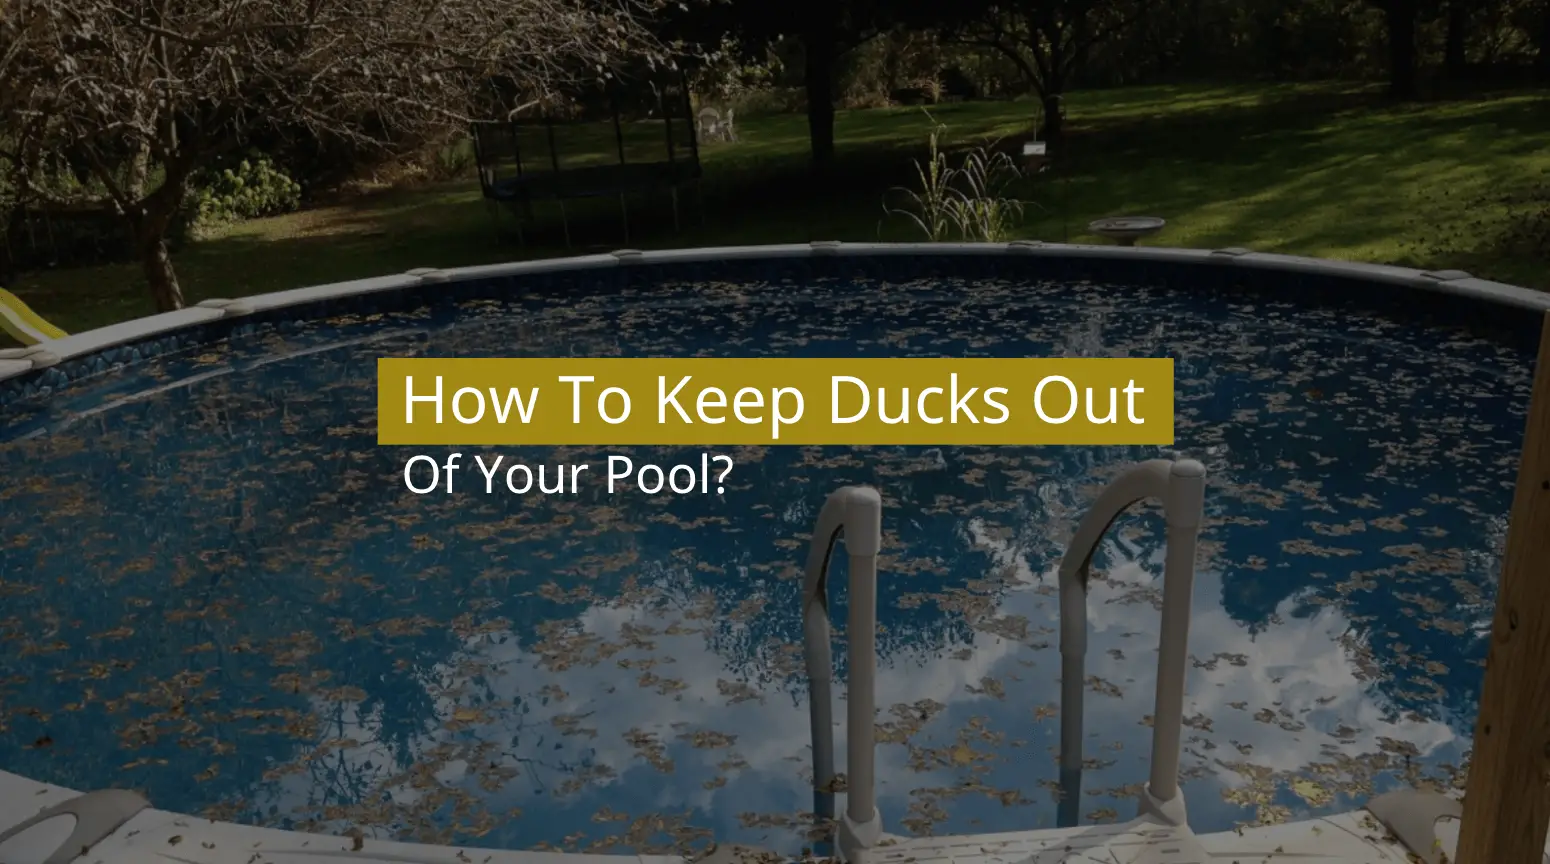 How To Keep Ducks Out Of Your Pool? (10 Easy Ways)